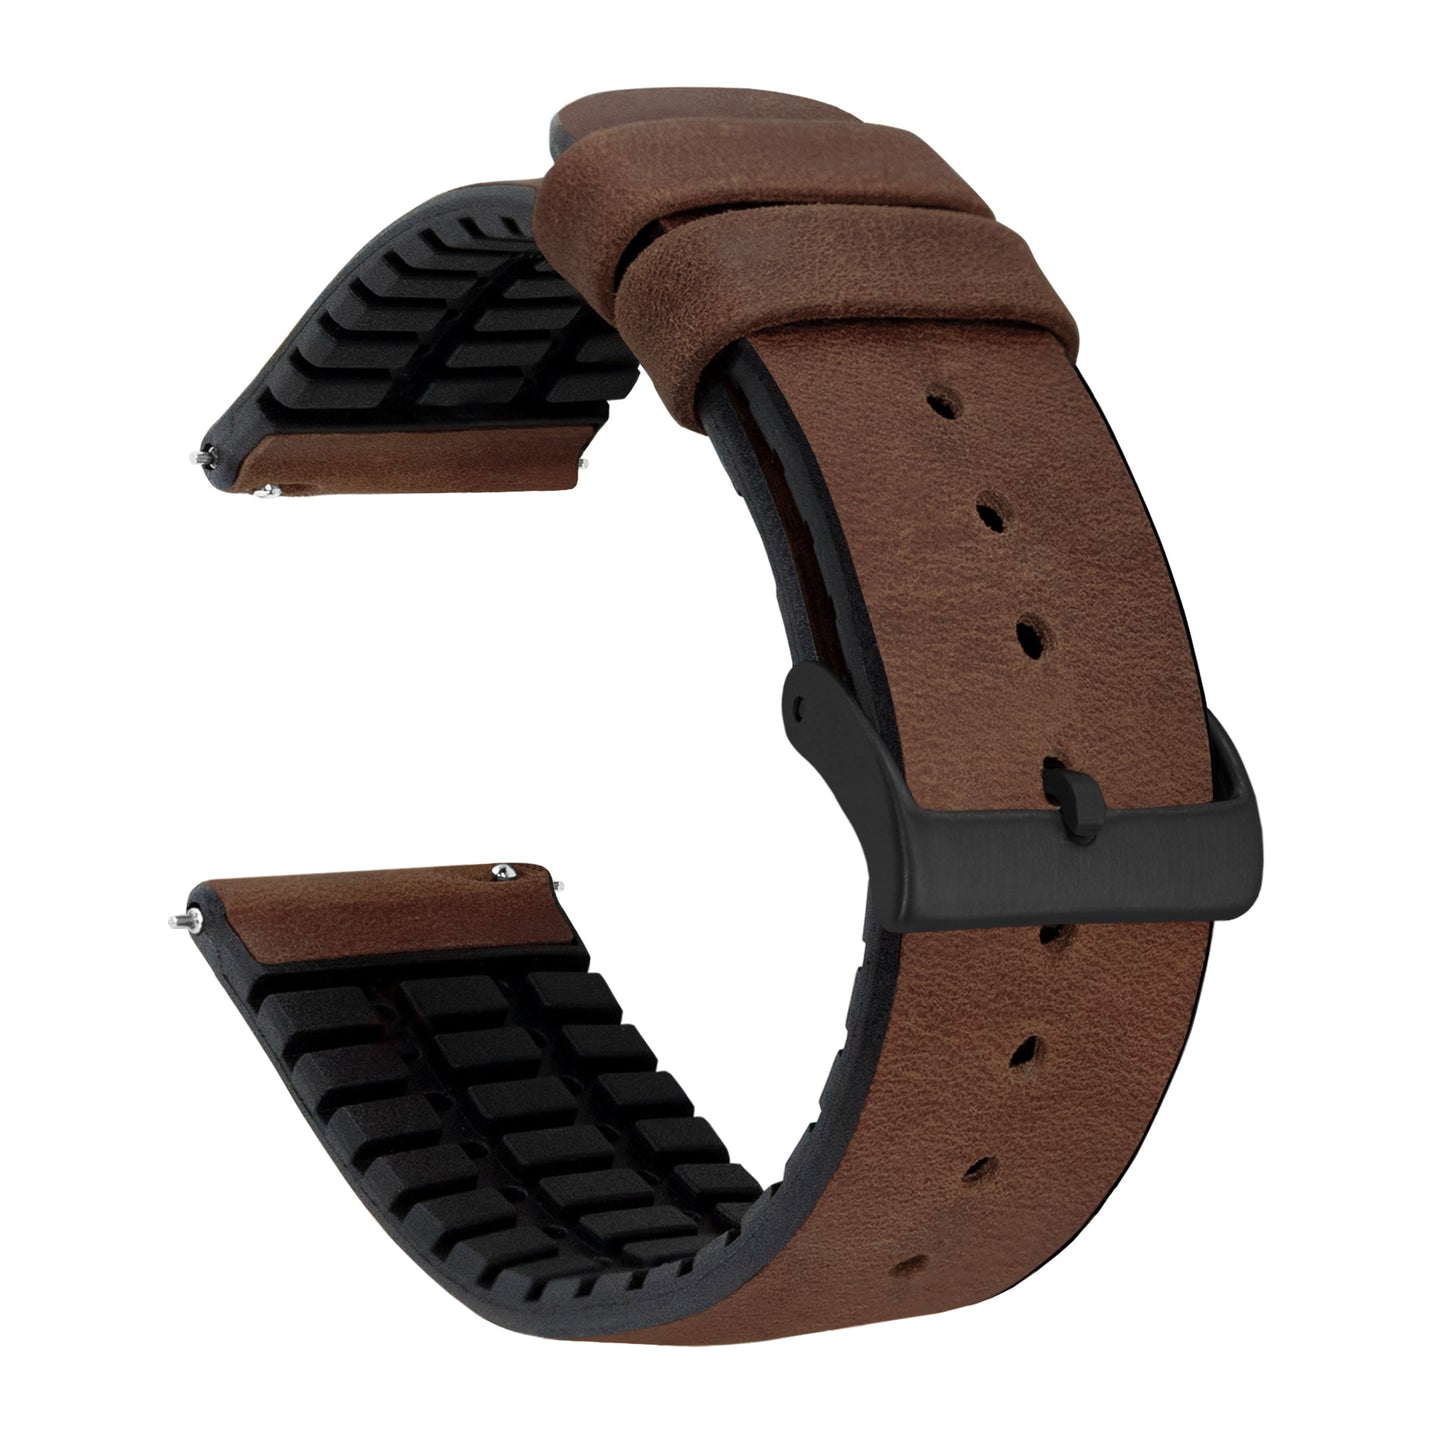 Samsung Galaxy Watch Active 2 | Leather and Rubber Hybrid | Walnut Brown - Barton Watch Bands